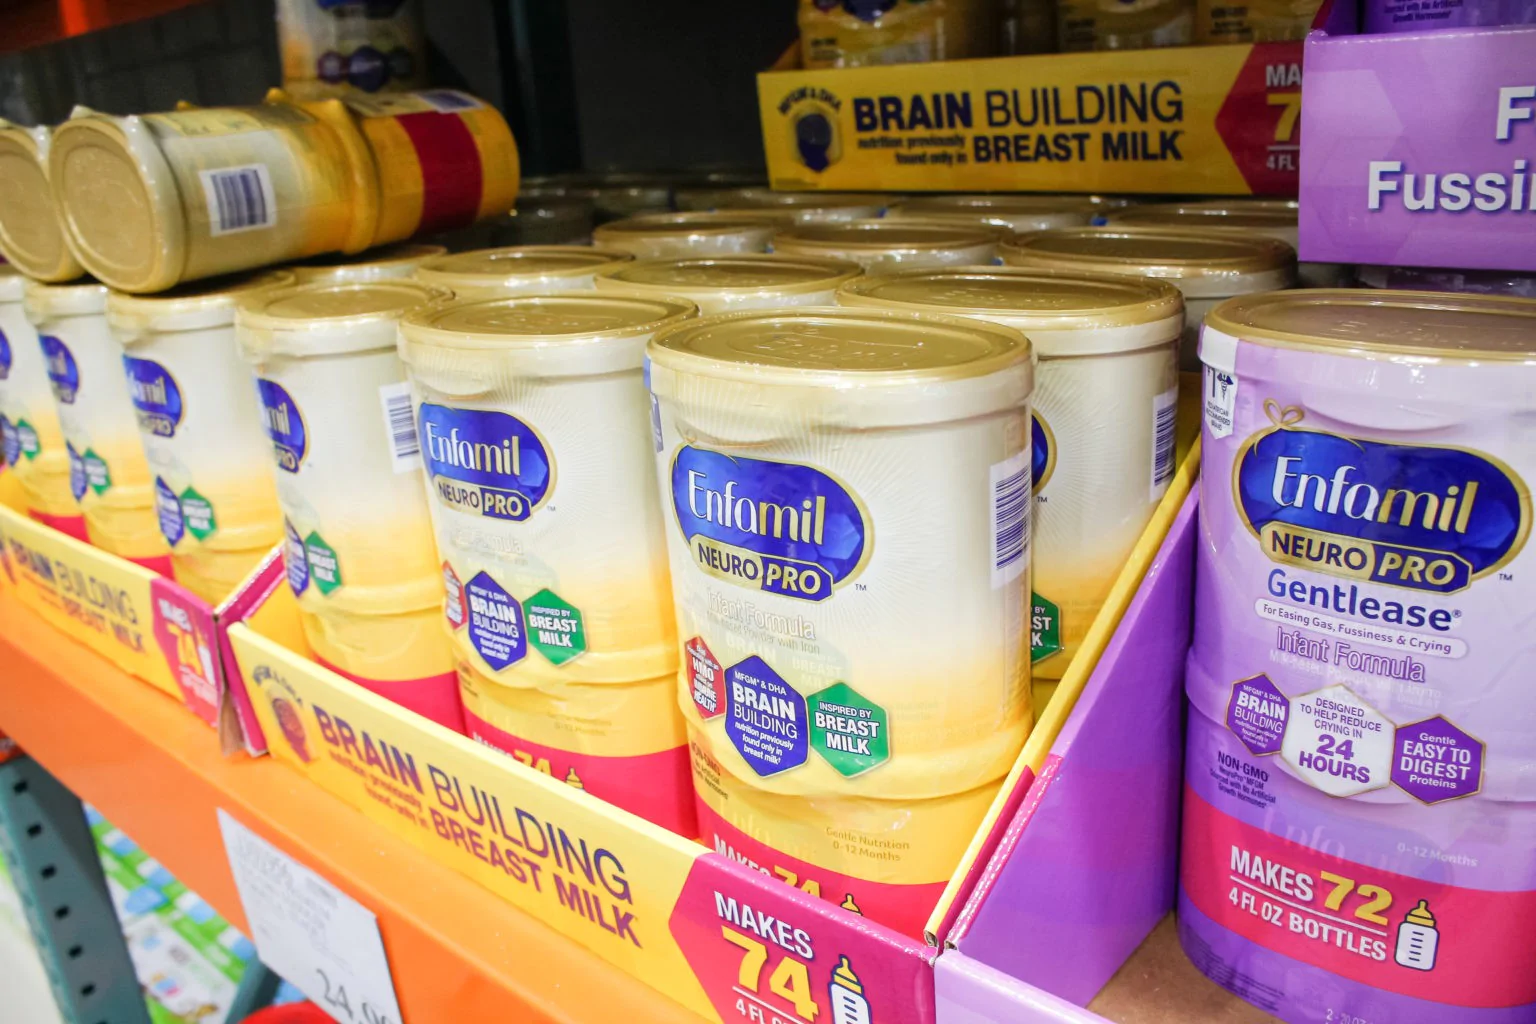 enfamil and similac mass tort lawyers help clients sue these companies for failure to warn against bovine-related diseases appearing in infants